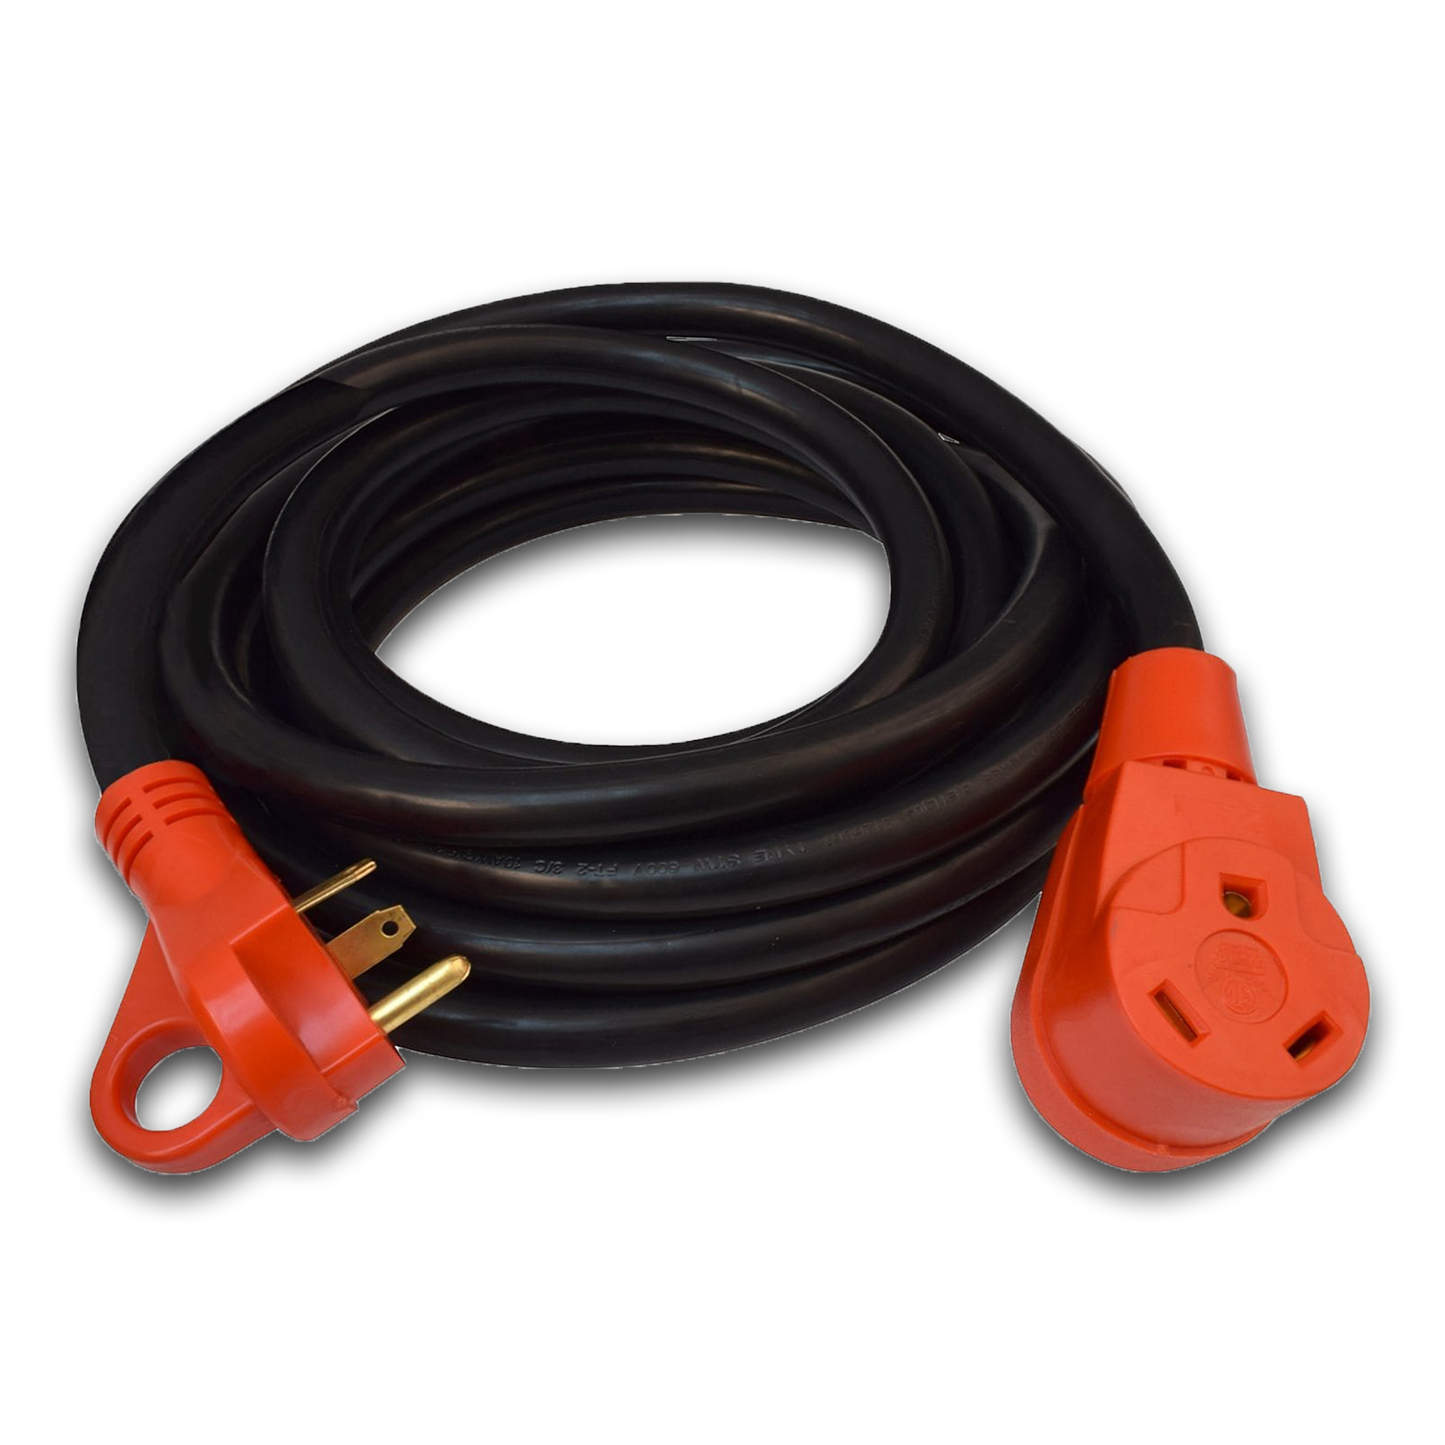 MIGHTY EXTENSION CORD W/HANDLE